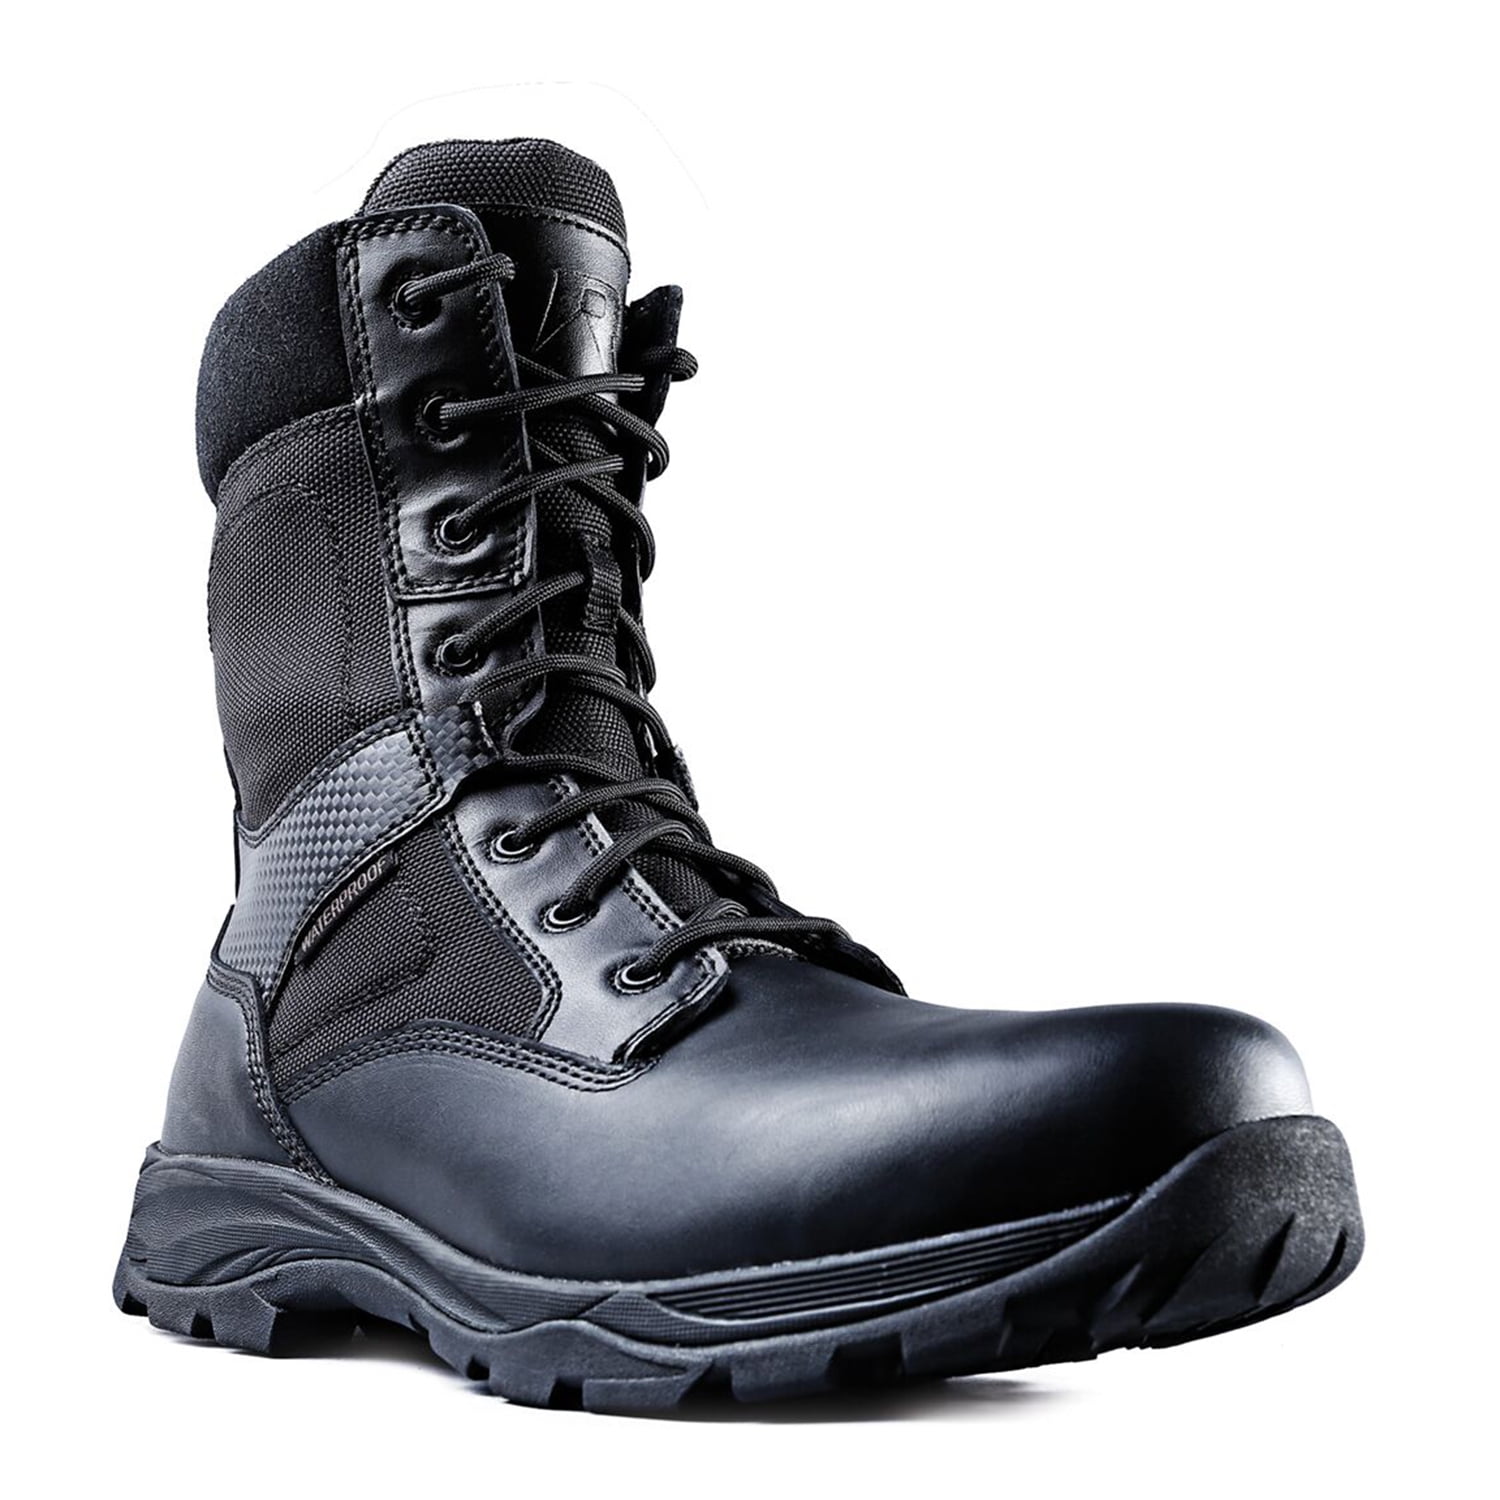 Pro Heavy Duty Water Resistant Leather Mens Safety Work Boots Composite Toe Cap 